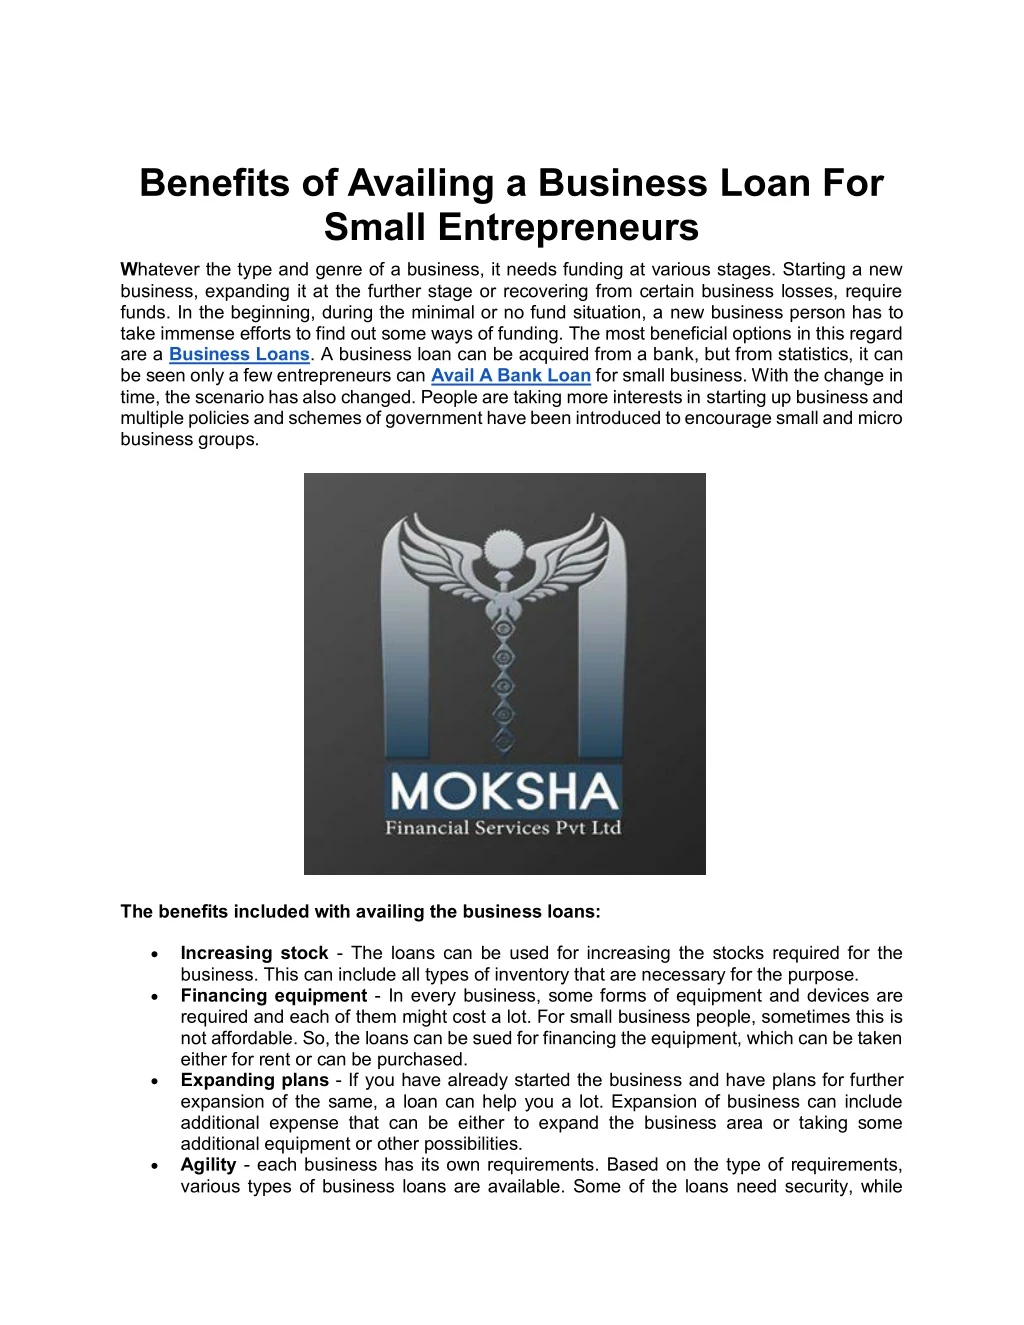 benefits of availing a business loan for small